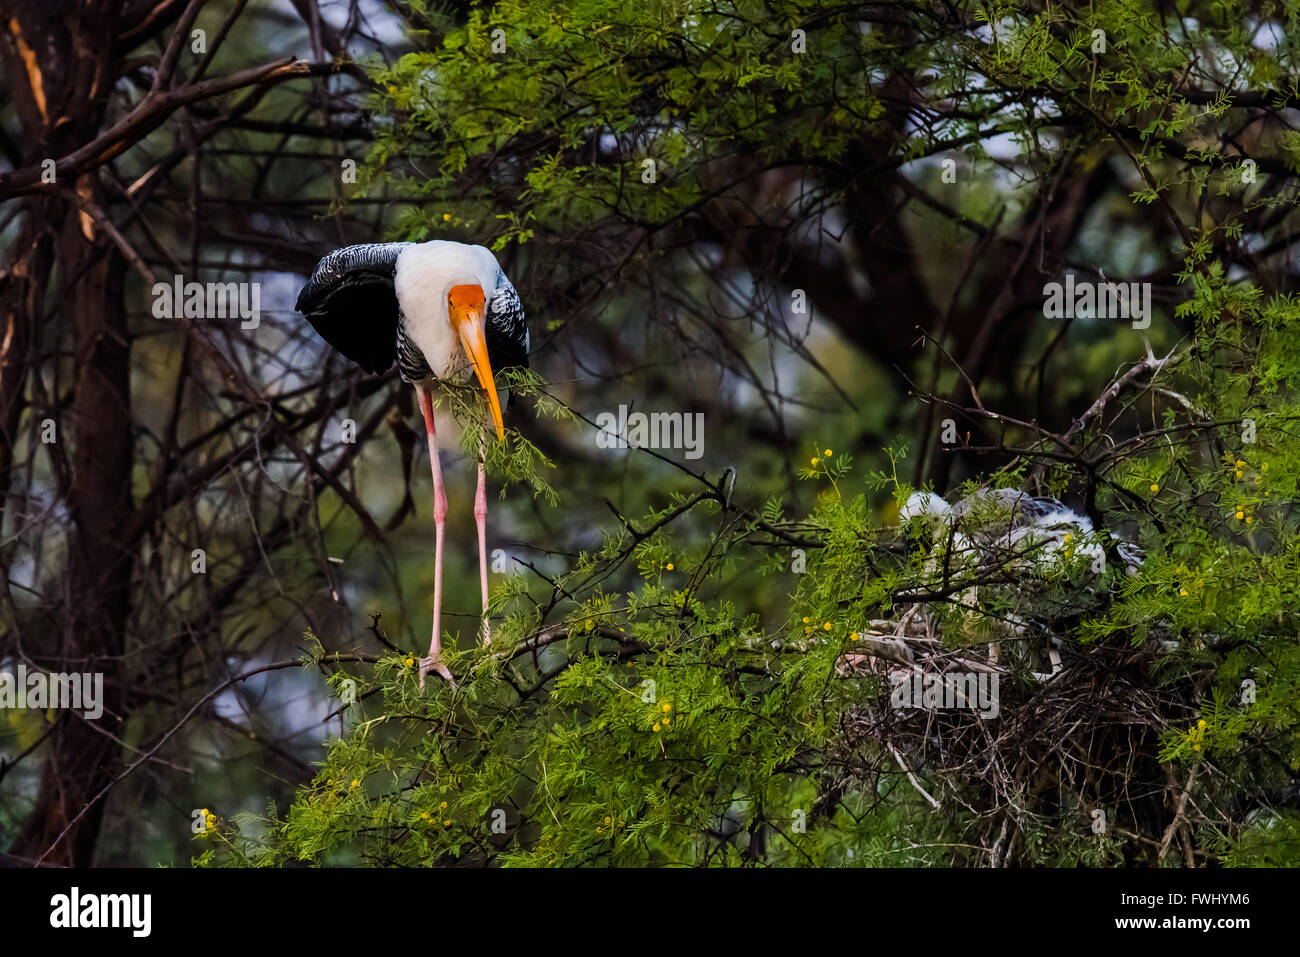 The painted stork is a large wading bird in the stork family. It is found in the wetlands of the plains of tropical Asia south o Stock Photo